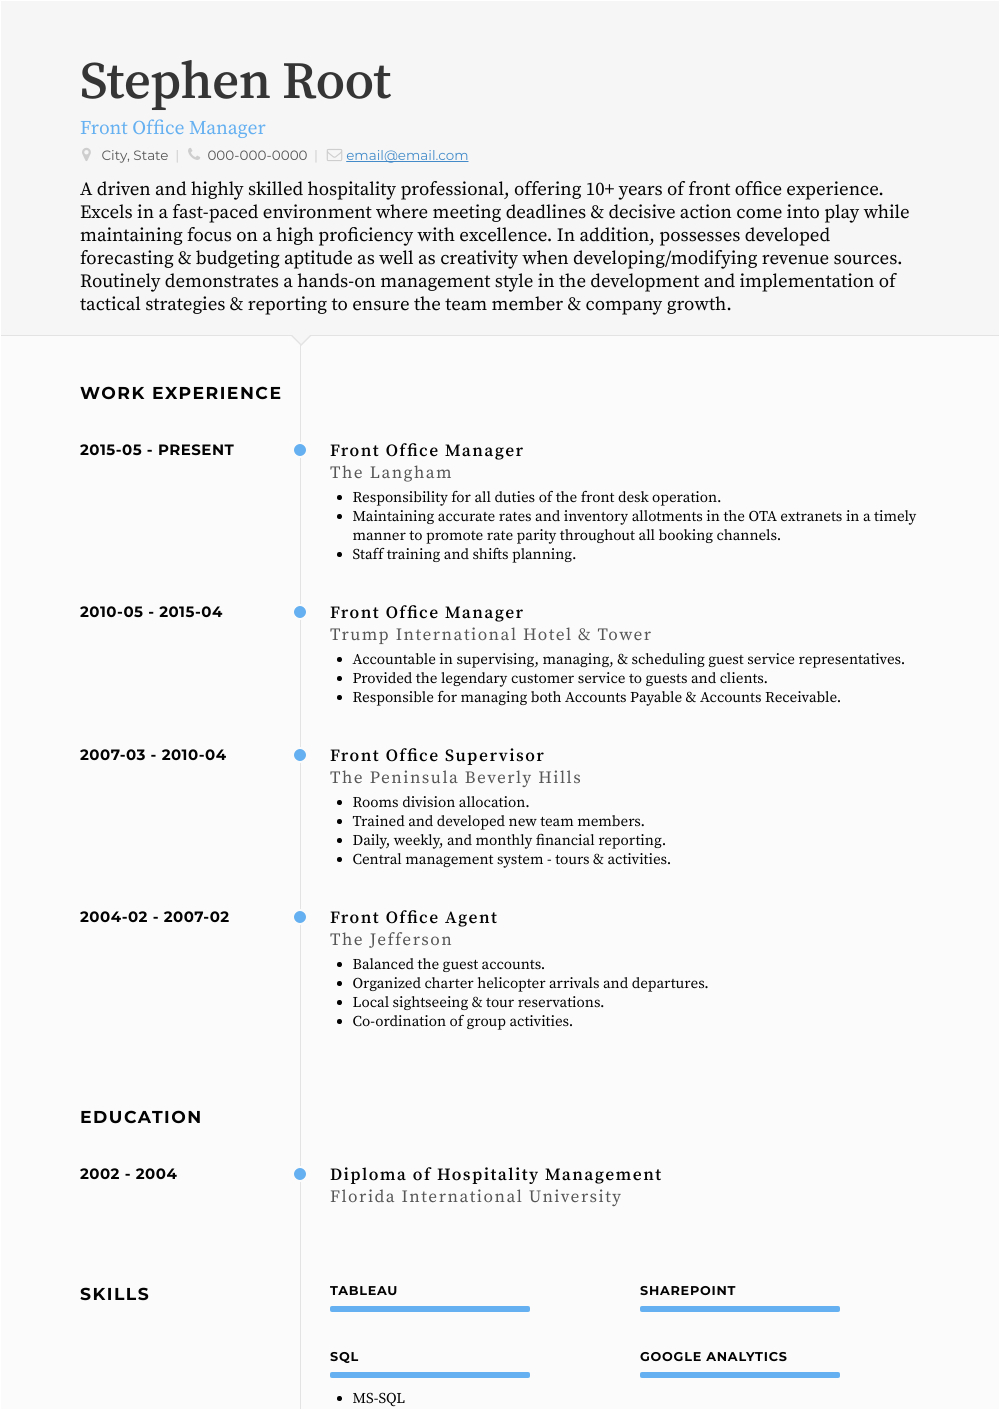 Front Office Manager Job Resume Sample Front Fice Manager Resume Samples and Templates